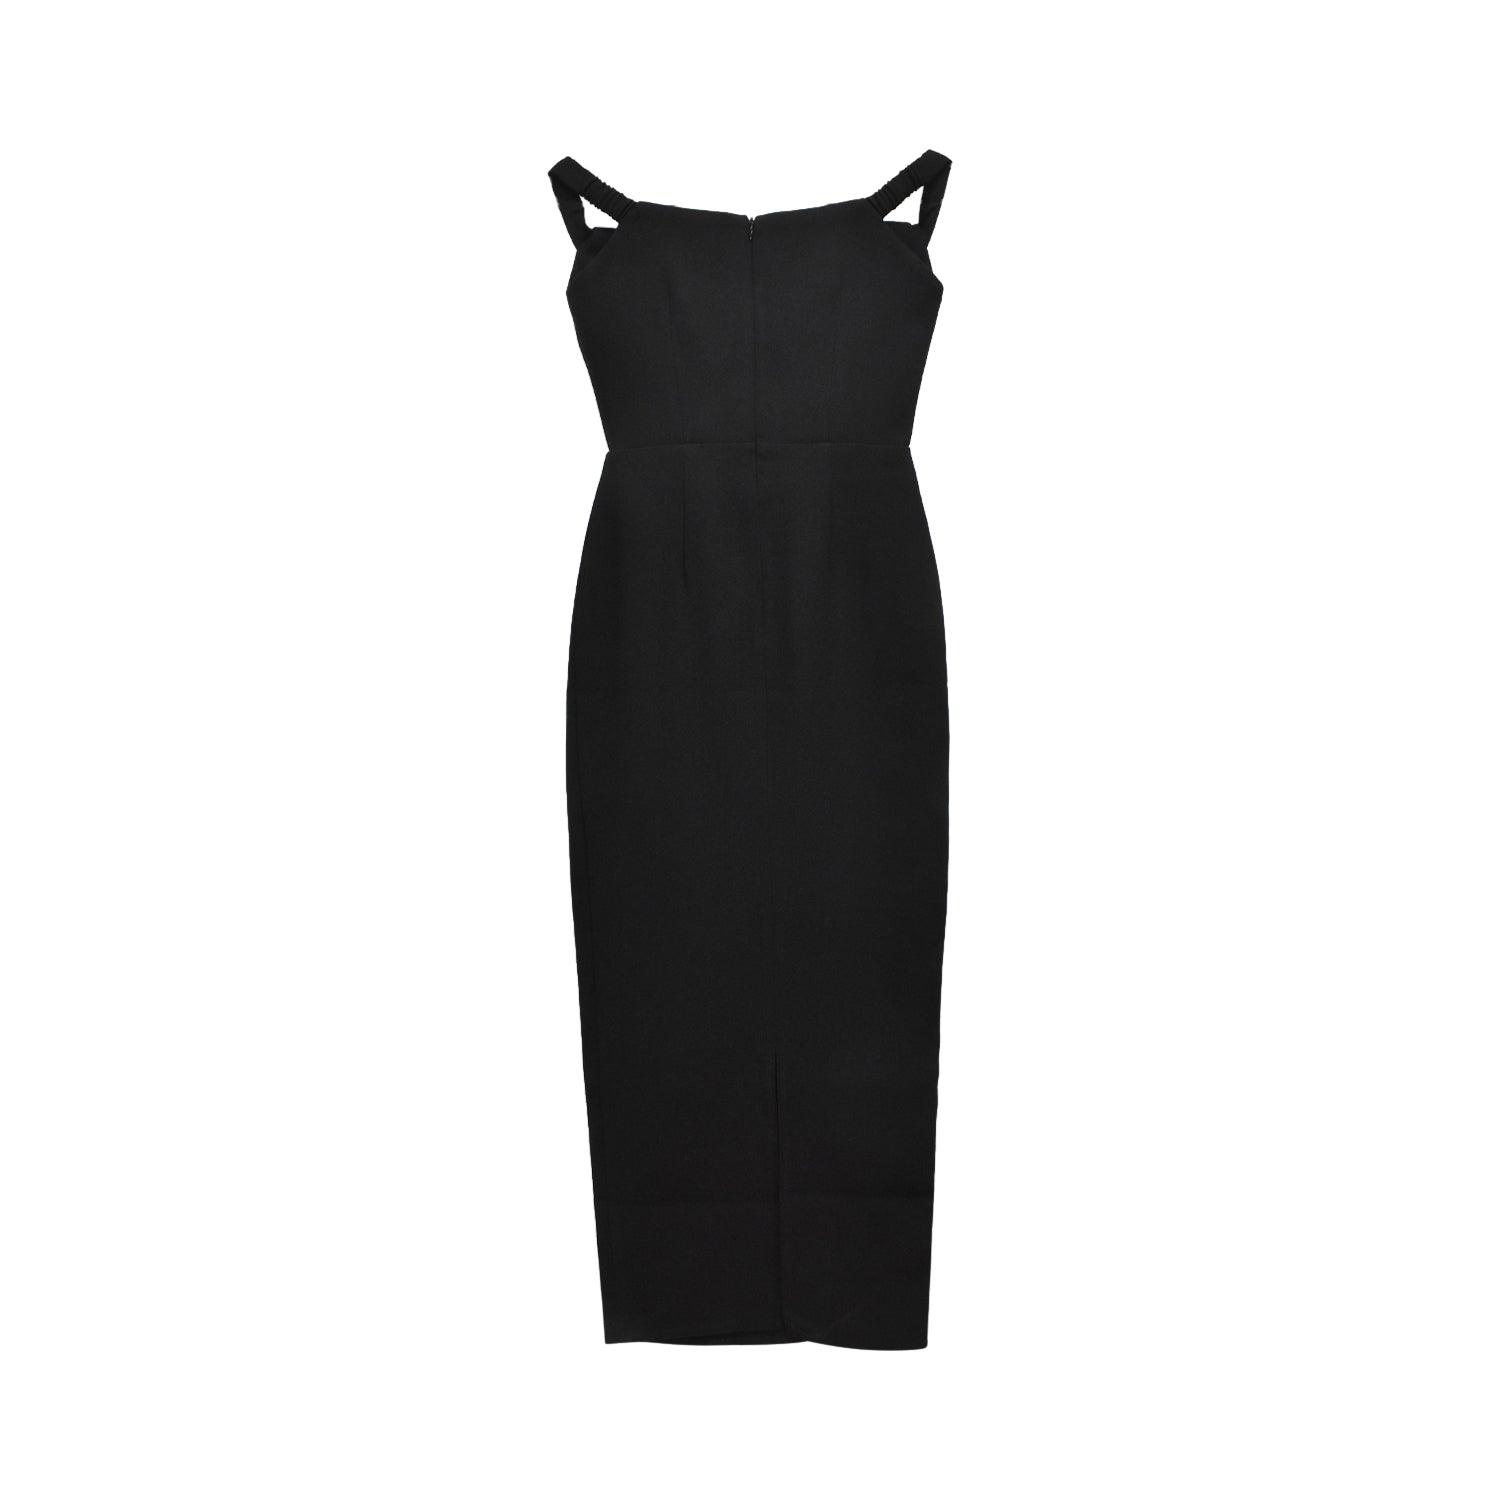 Alex Perry Dress - Women's 2 - Fashionably Yours